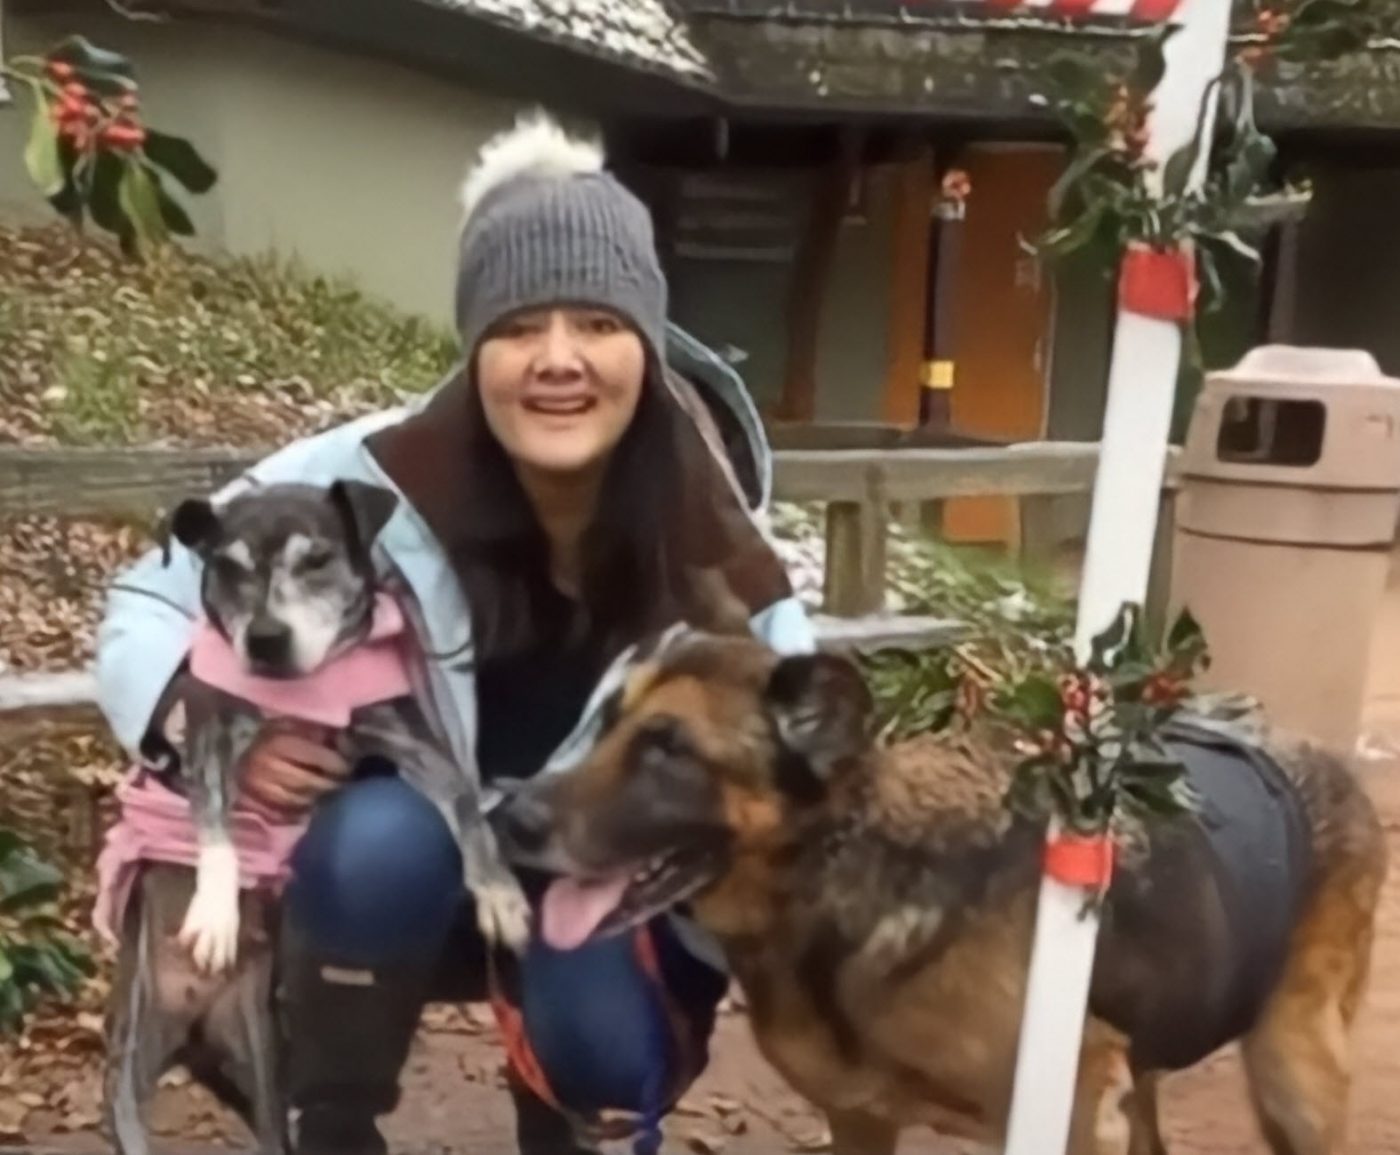 Retired Nurse Opens A Hospice For Dying Senior Dogs Who Are Dumped Without Love